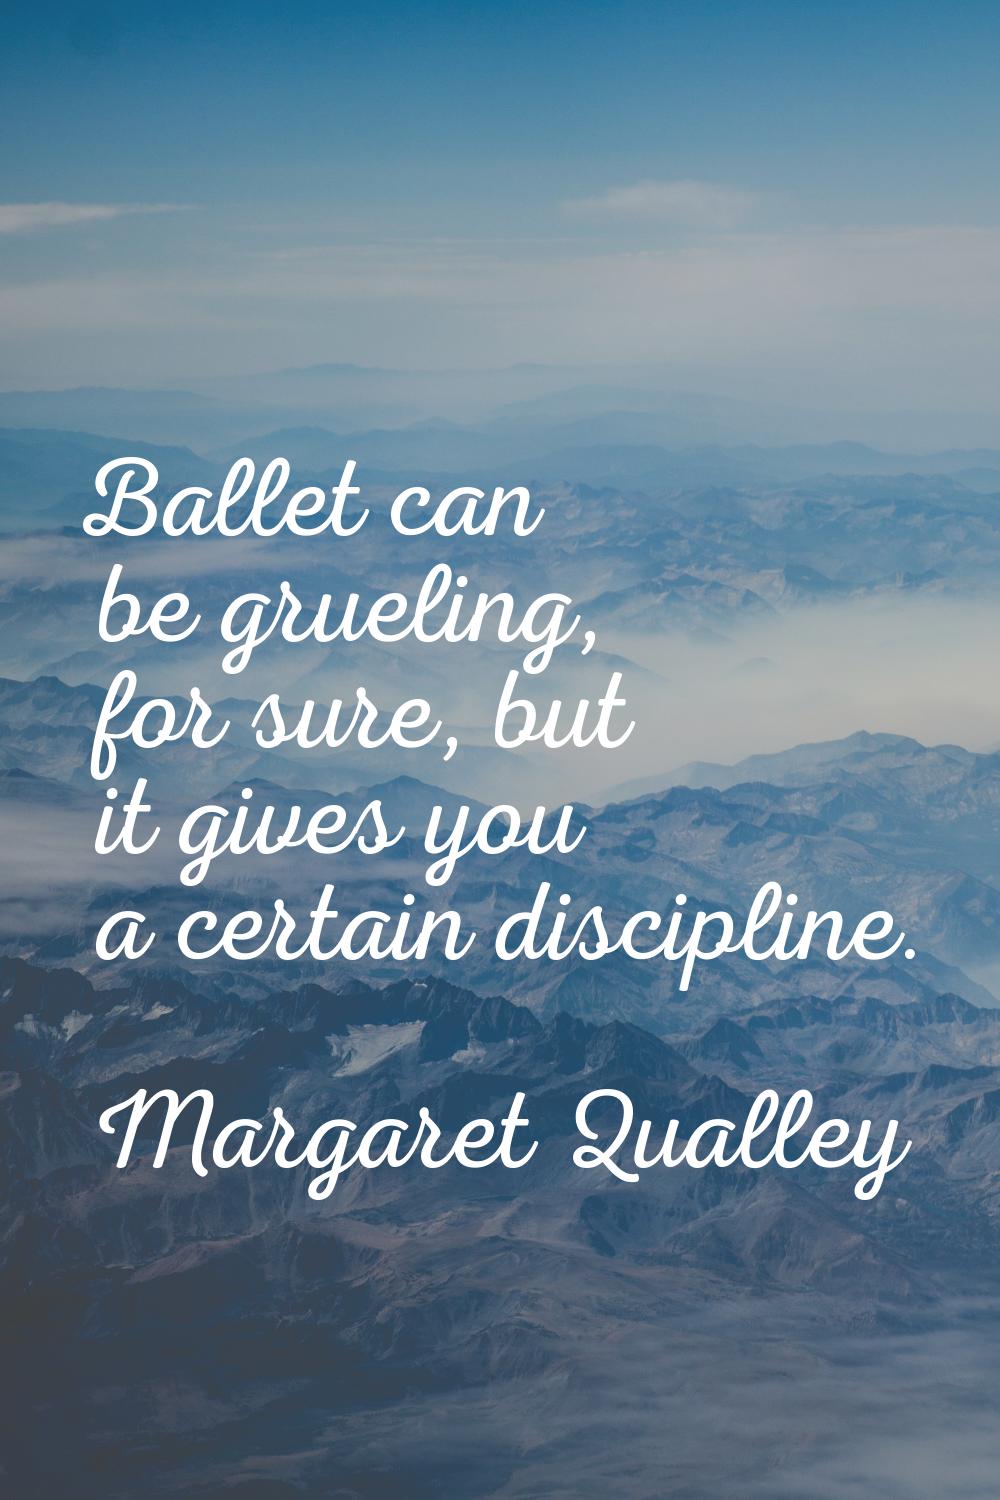 Ballet can be grueling, for sure, but it gives you a certain discipline.